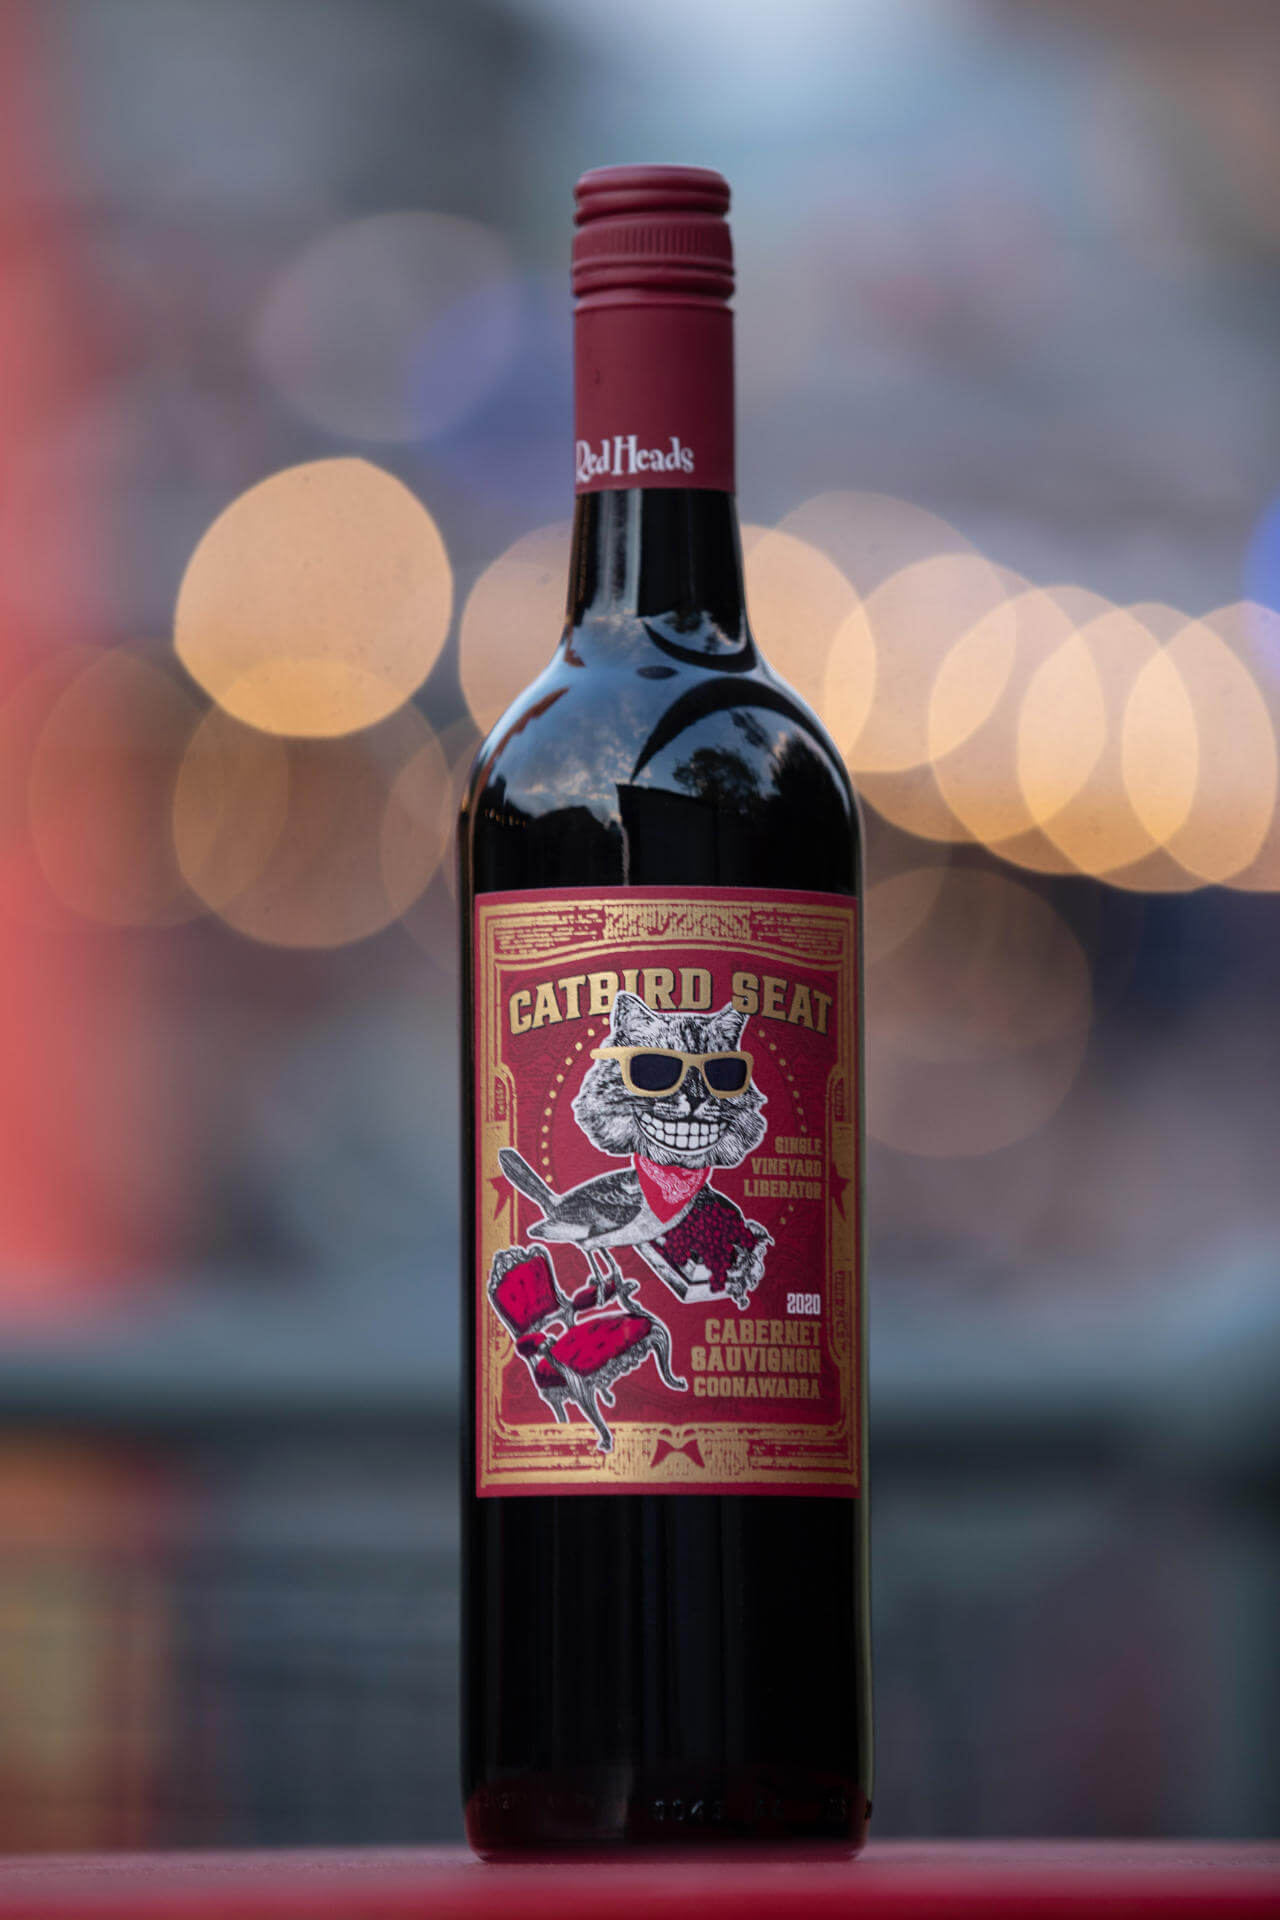 Catbird Seat is a great example of the best red wine to gift